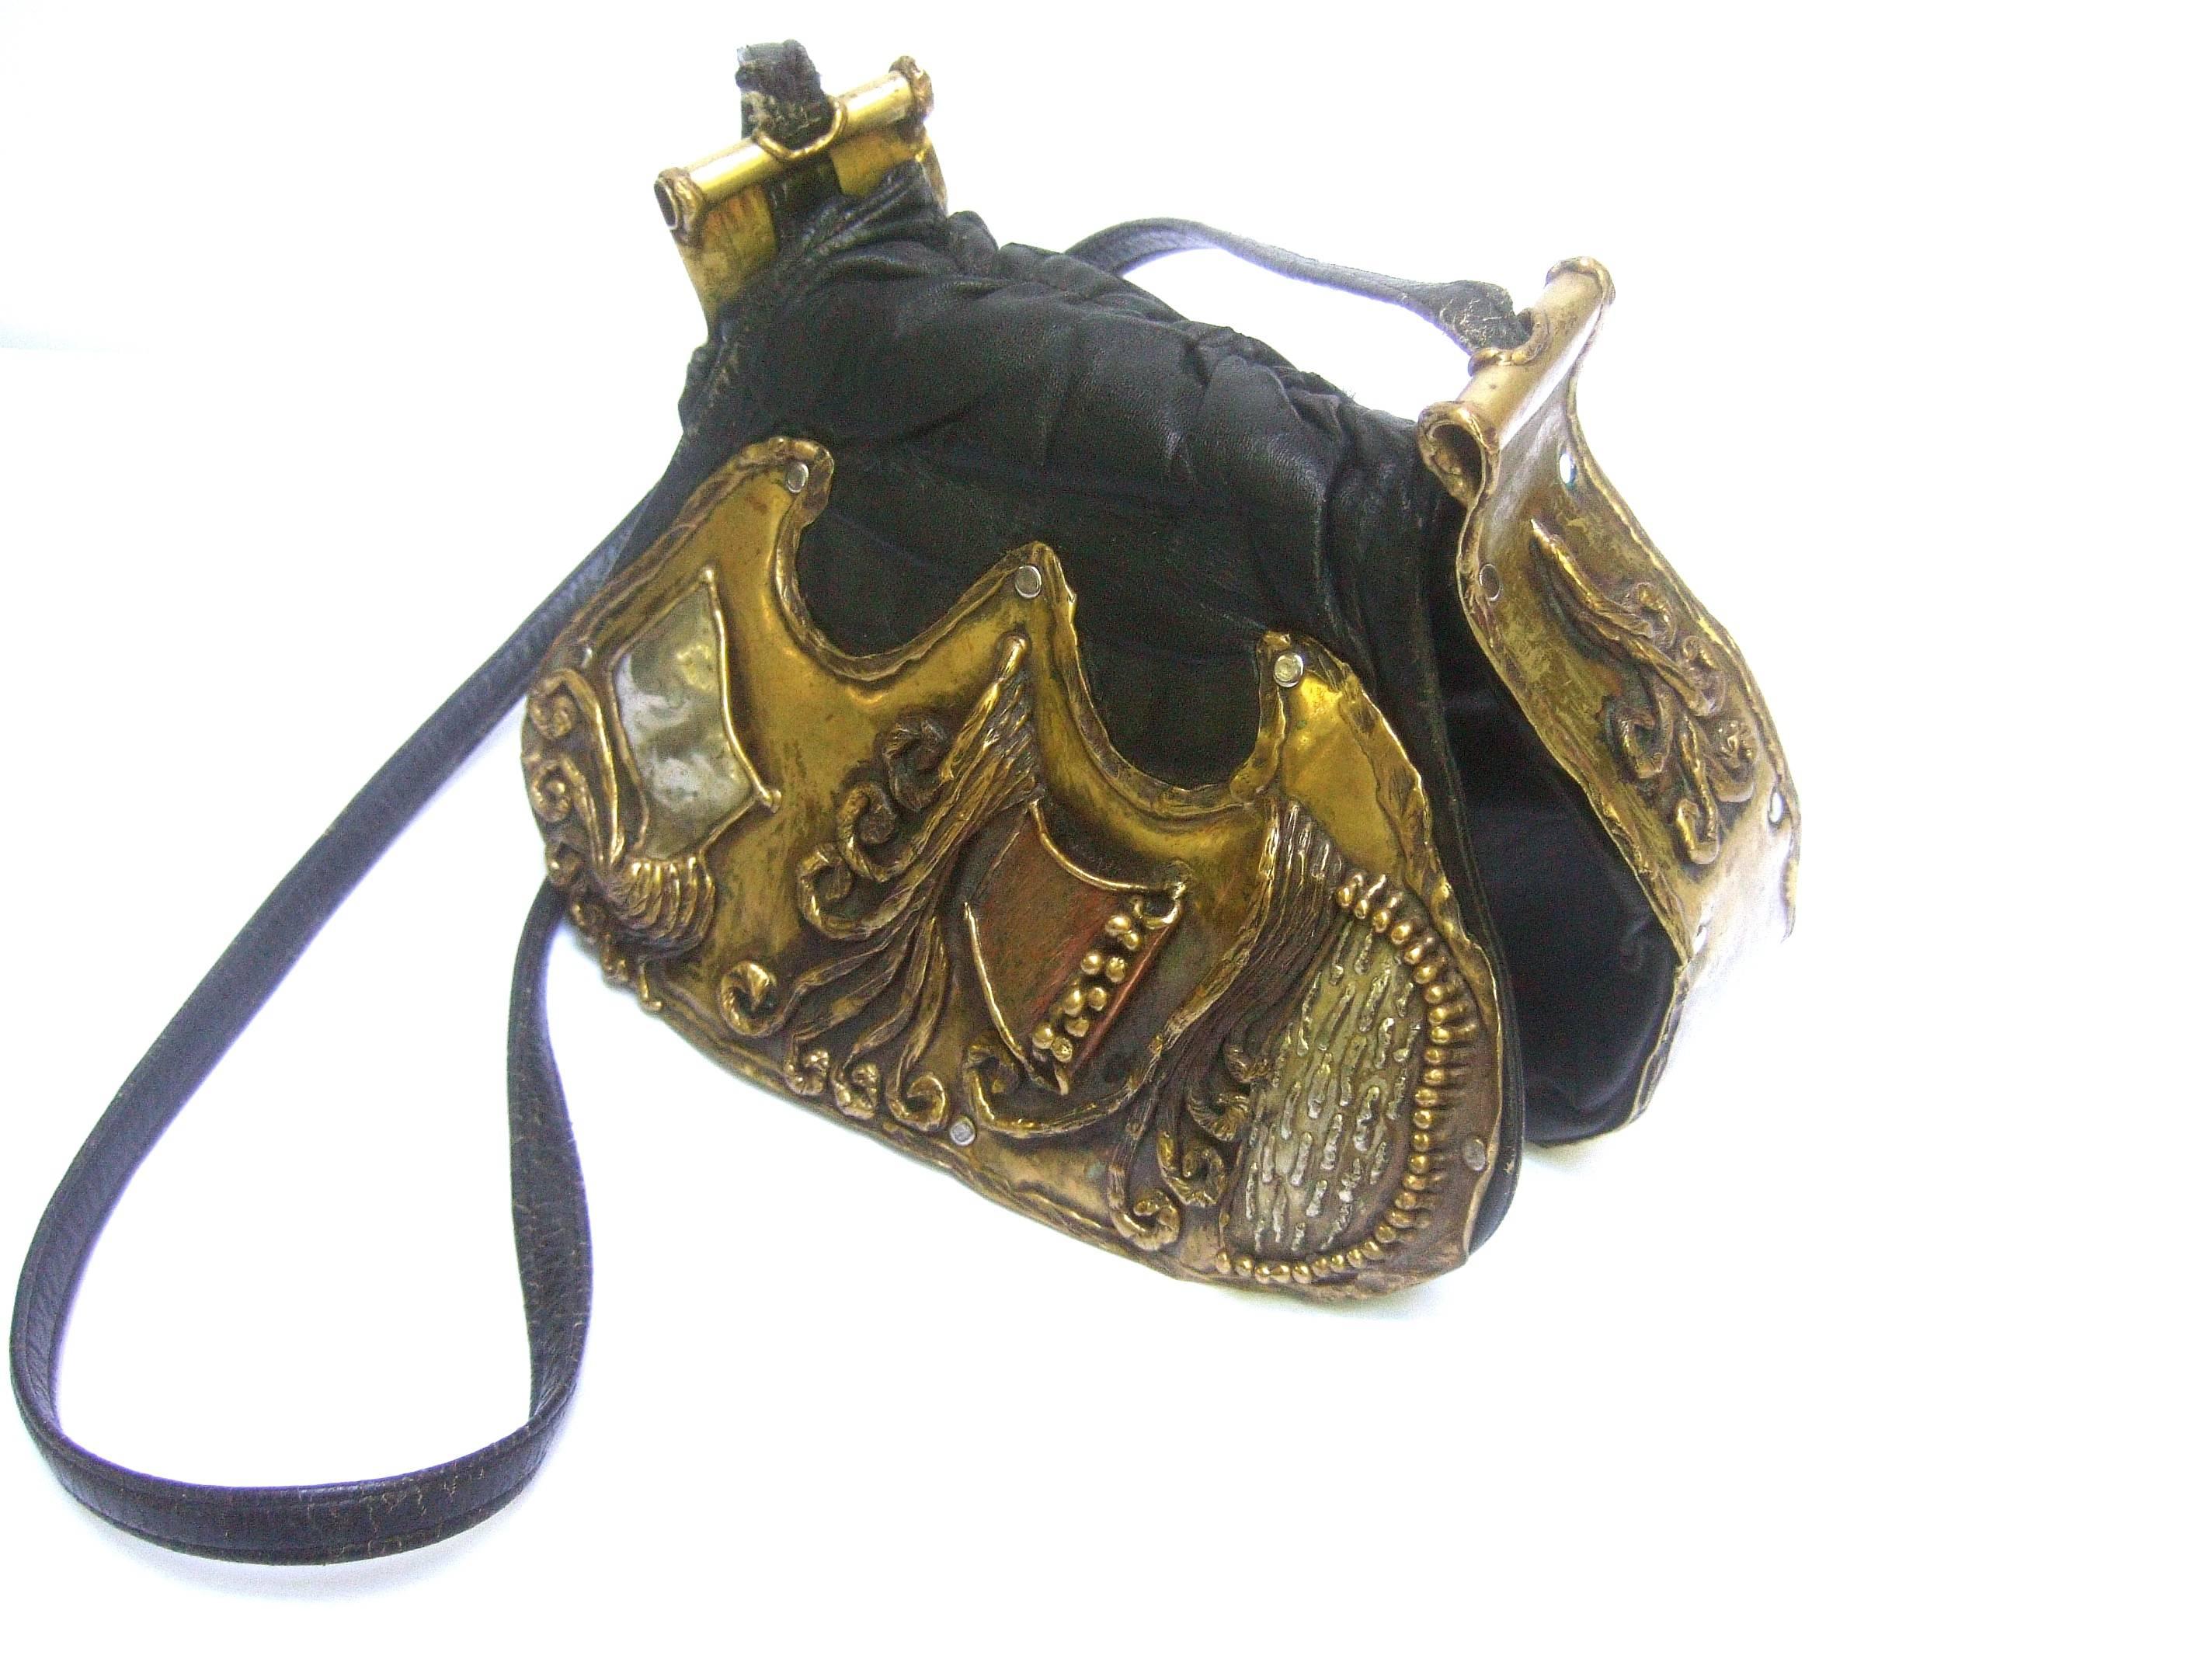 Avant garde brutalist mixed metal artisan handbag ca 1970s
The unique handmade shoulder bag is adorned 
with sinuous three dimensional mixed metal work
designs on the black leather flap cover 

The mixed metal work designs are primarily brass